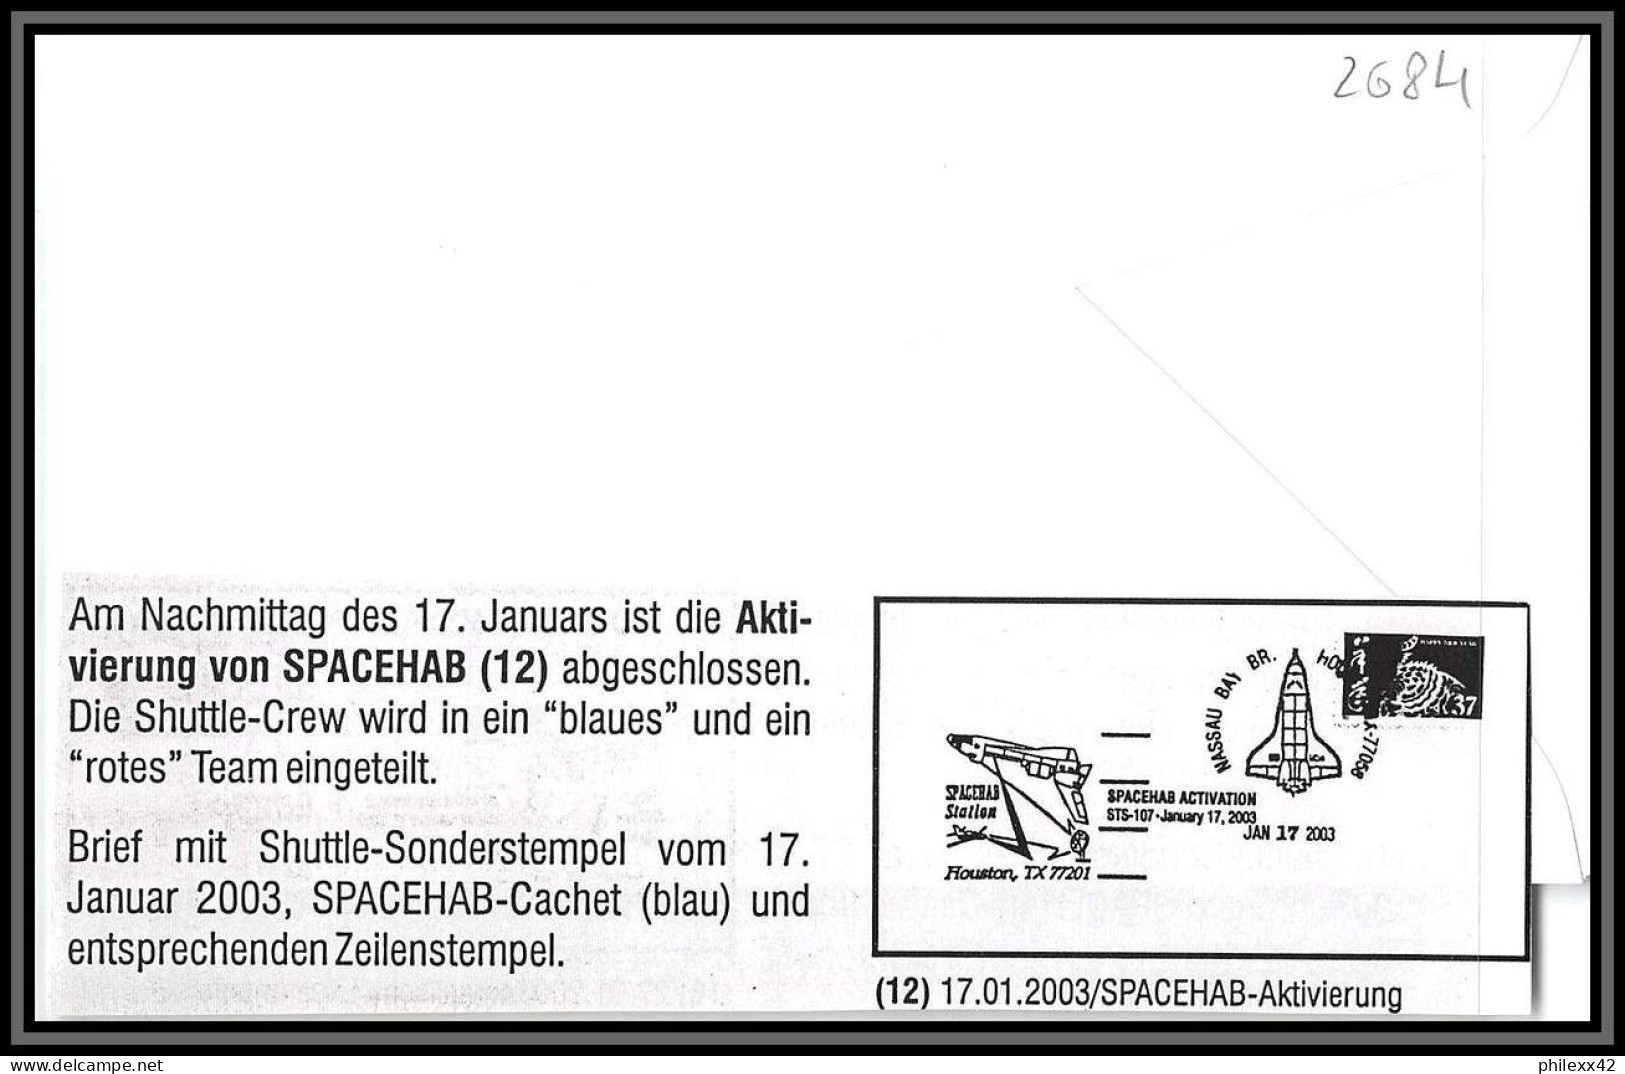 2684 Espace (space Raumfahrt) Lettre (cover) USA- Sts-107 Columbia Shuttle (navette) SPACEHAB Activation 17/1/2003  - United States